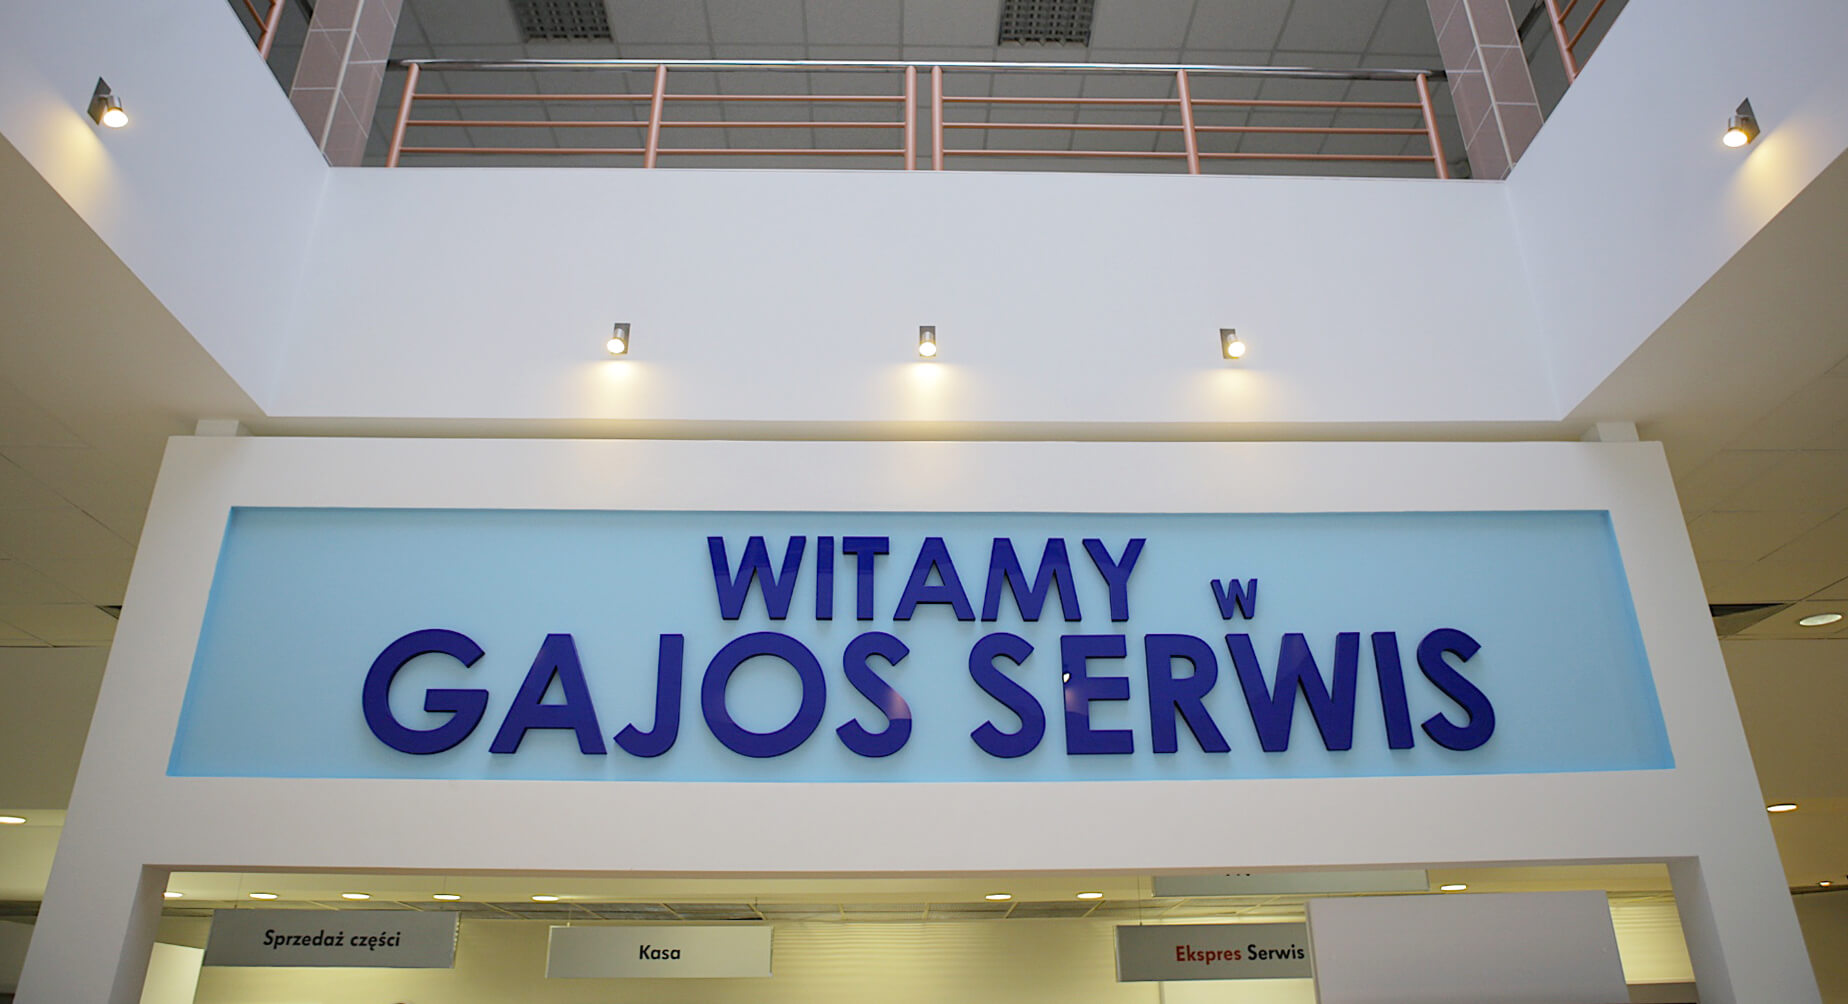 Gajos ServiceService - Gajos Serwis - styrodur letters placed over the website entrance